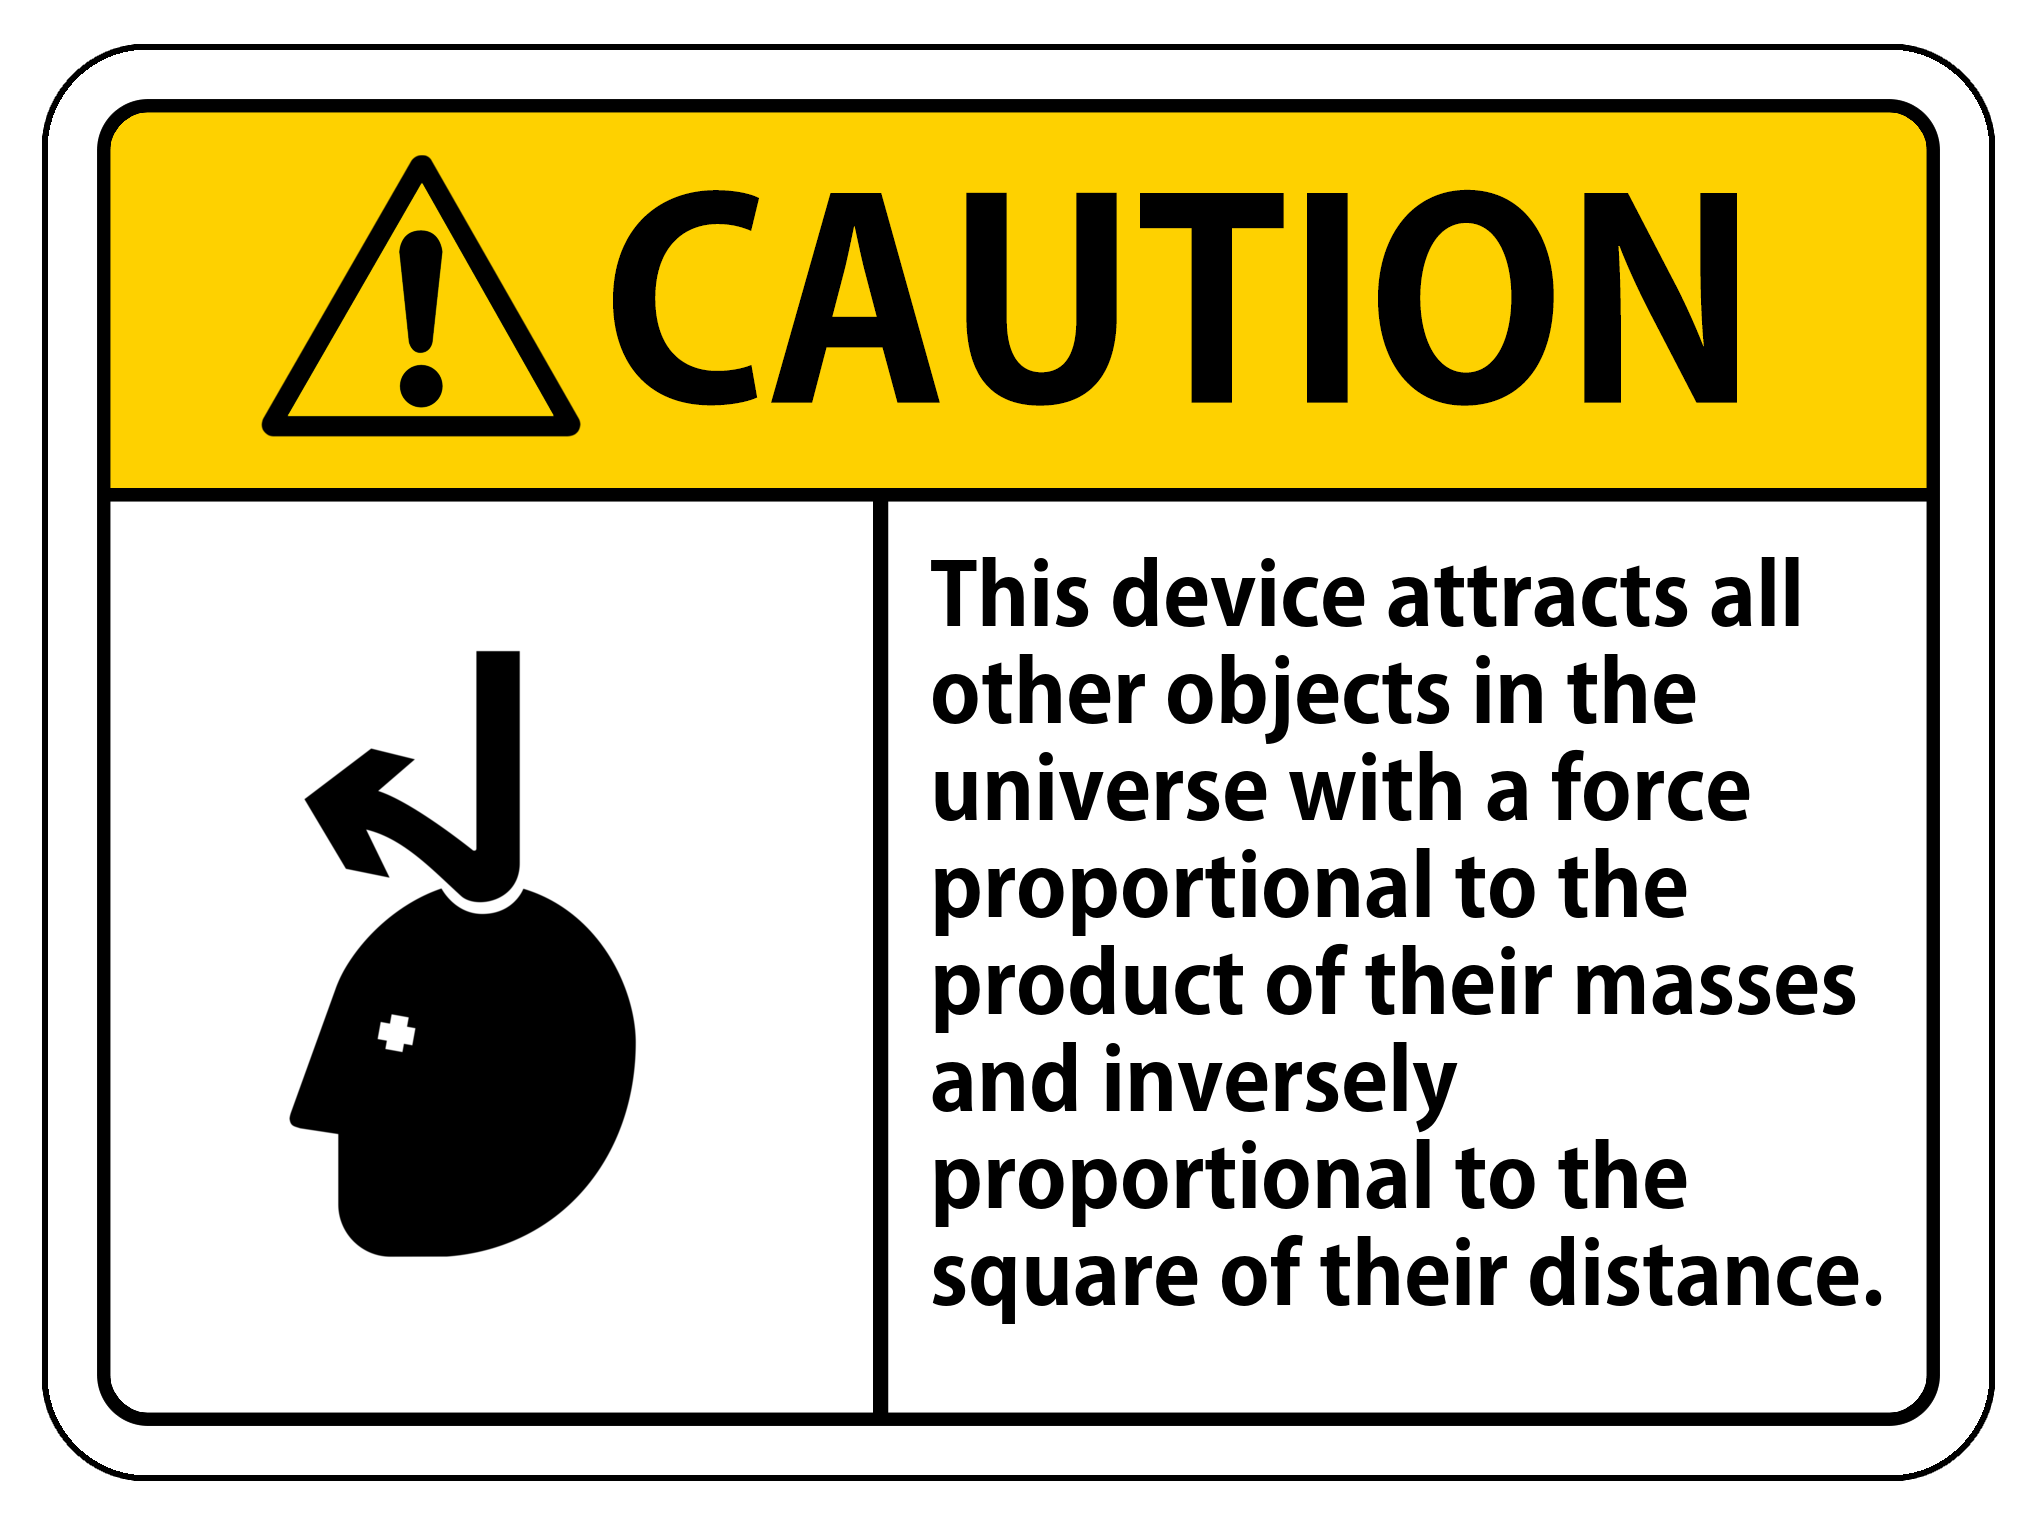 A sign in the style of an official warning sign, saying "Caution: This device attracts all other objects in the universe with a force proportional to the product of their masses and inversely proportional to the square of their distance"